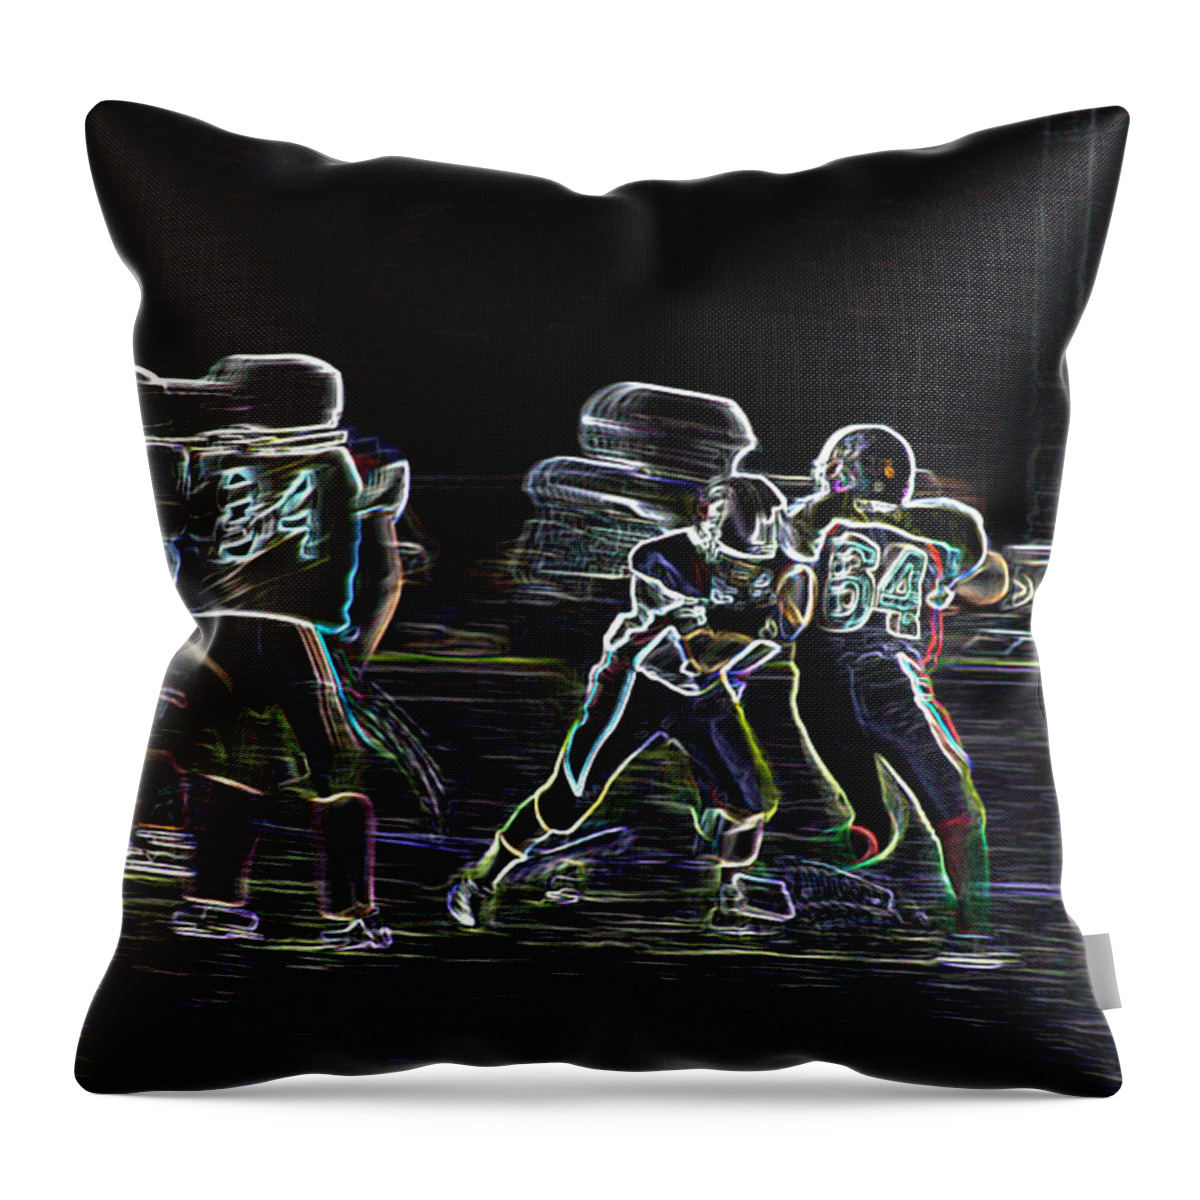 Football Throw Pillow featuring the pyrography Friday Night Under the Lights by Chris Thomas